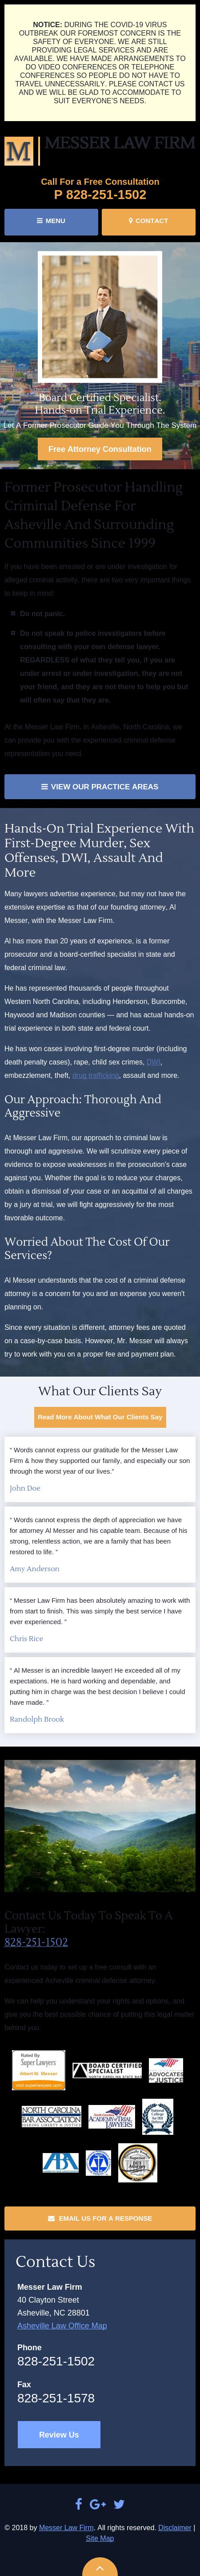 Messer Law Firm - Asheville NC Lawyers